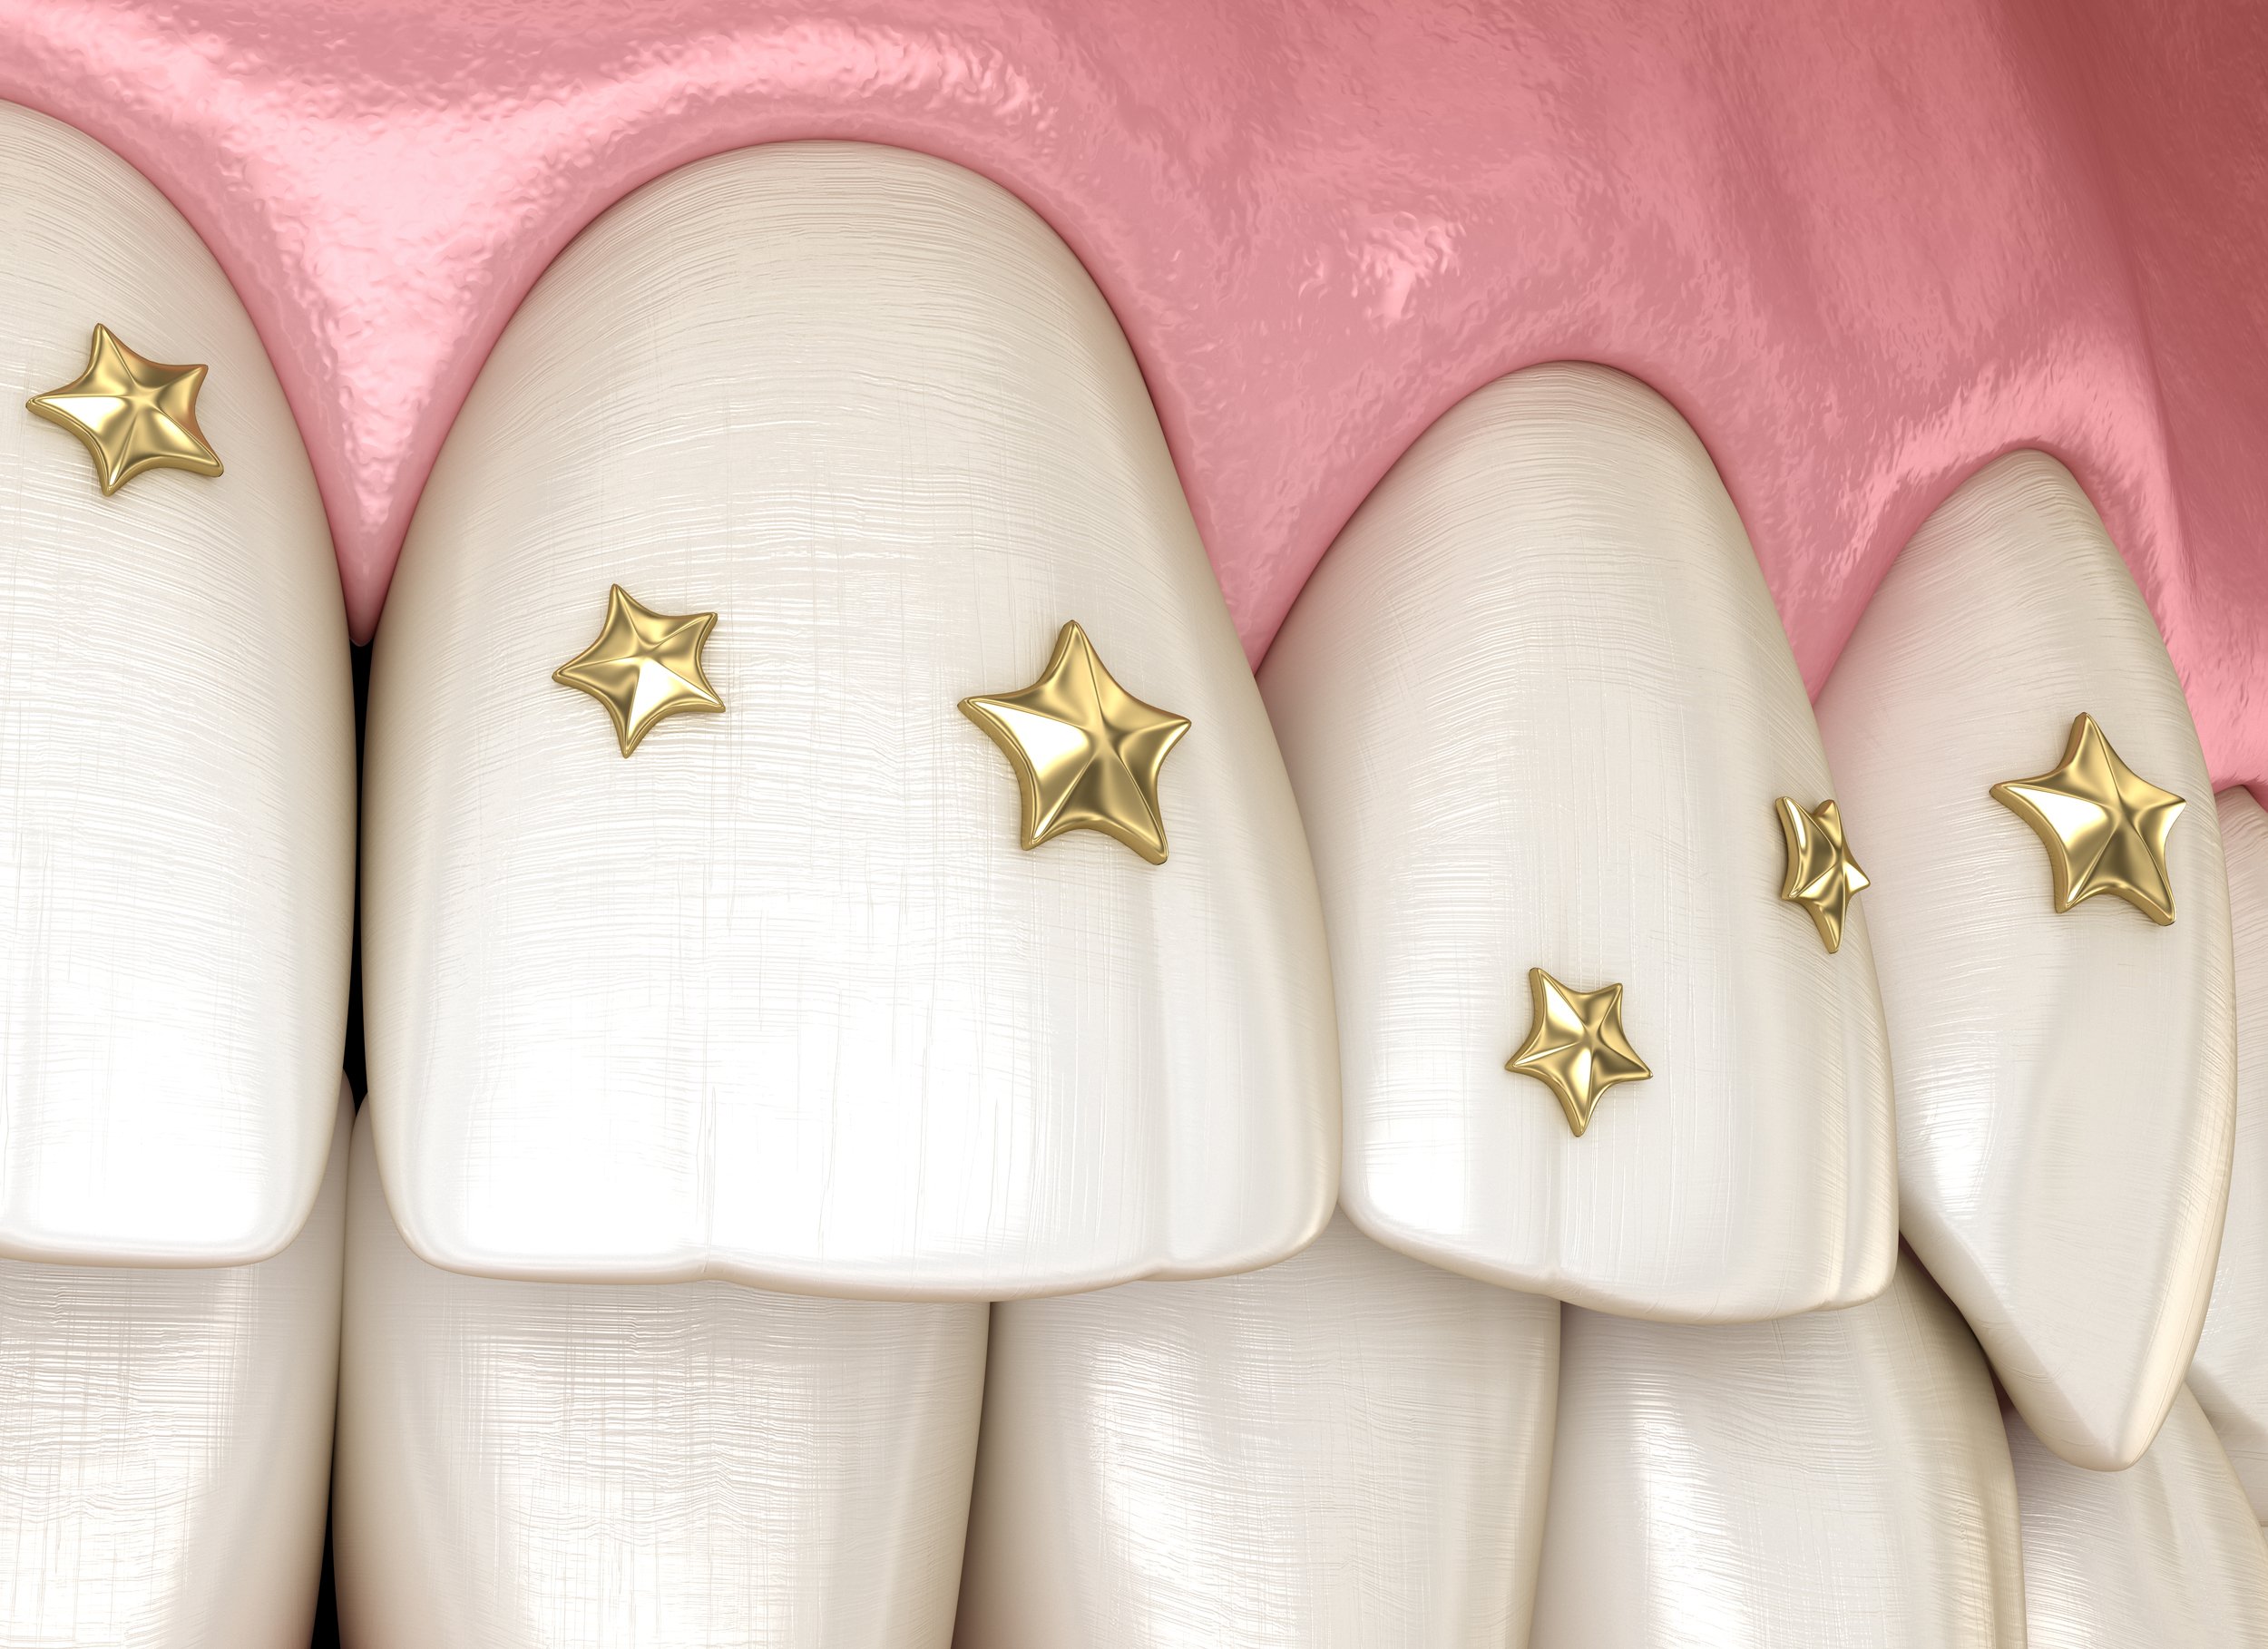 Tooth Gems and Tooth Jewelry - Westwood NJ Dentist